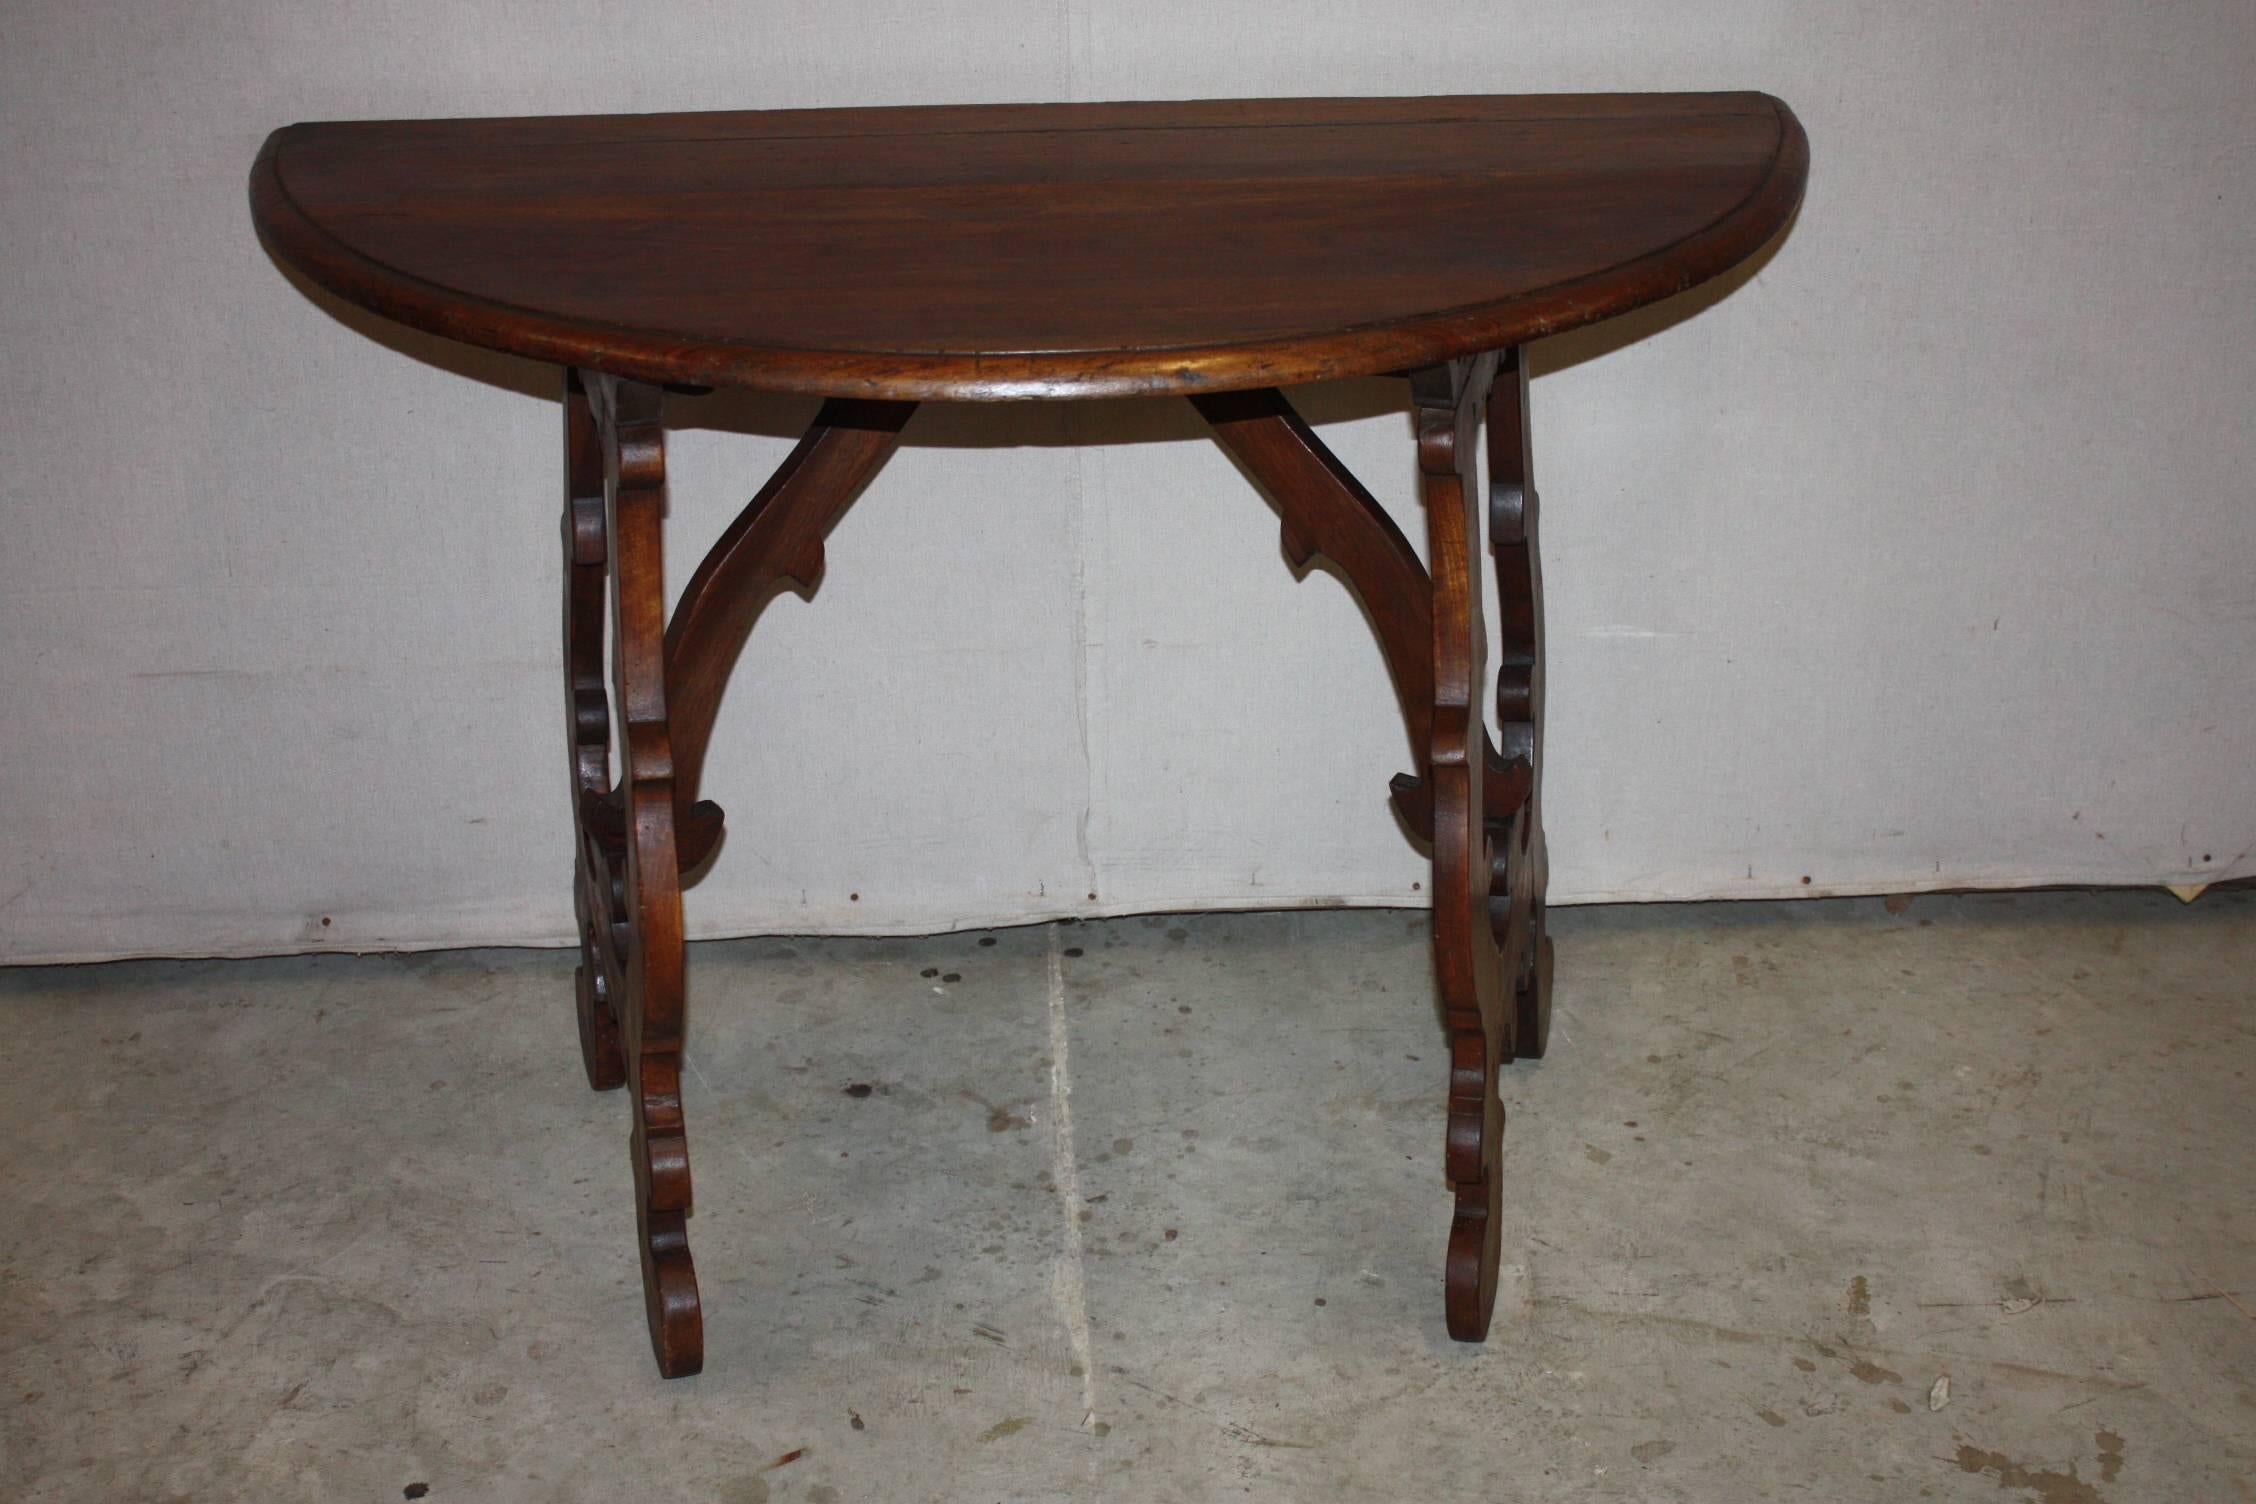 This is a very fine example of an Italian walnut console.  The patina of the wood is rich.  The design is very desirable.  This is very typical of an Italian demi-loom console.  It has very nice dimensions.